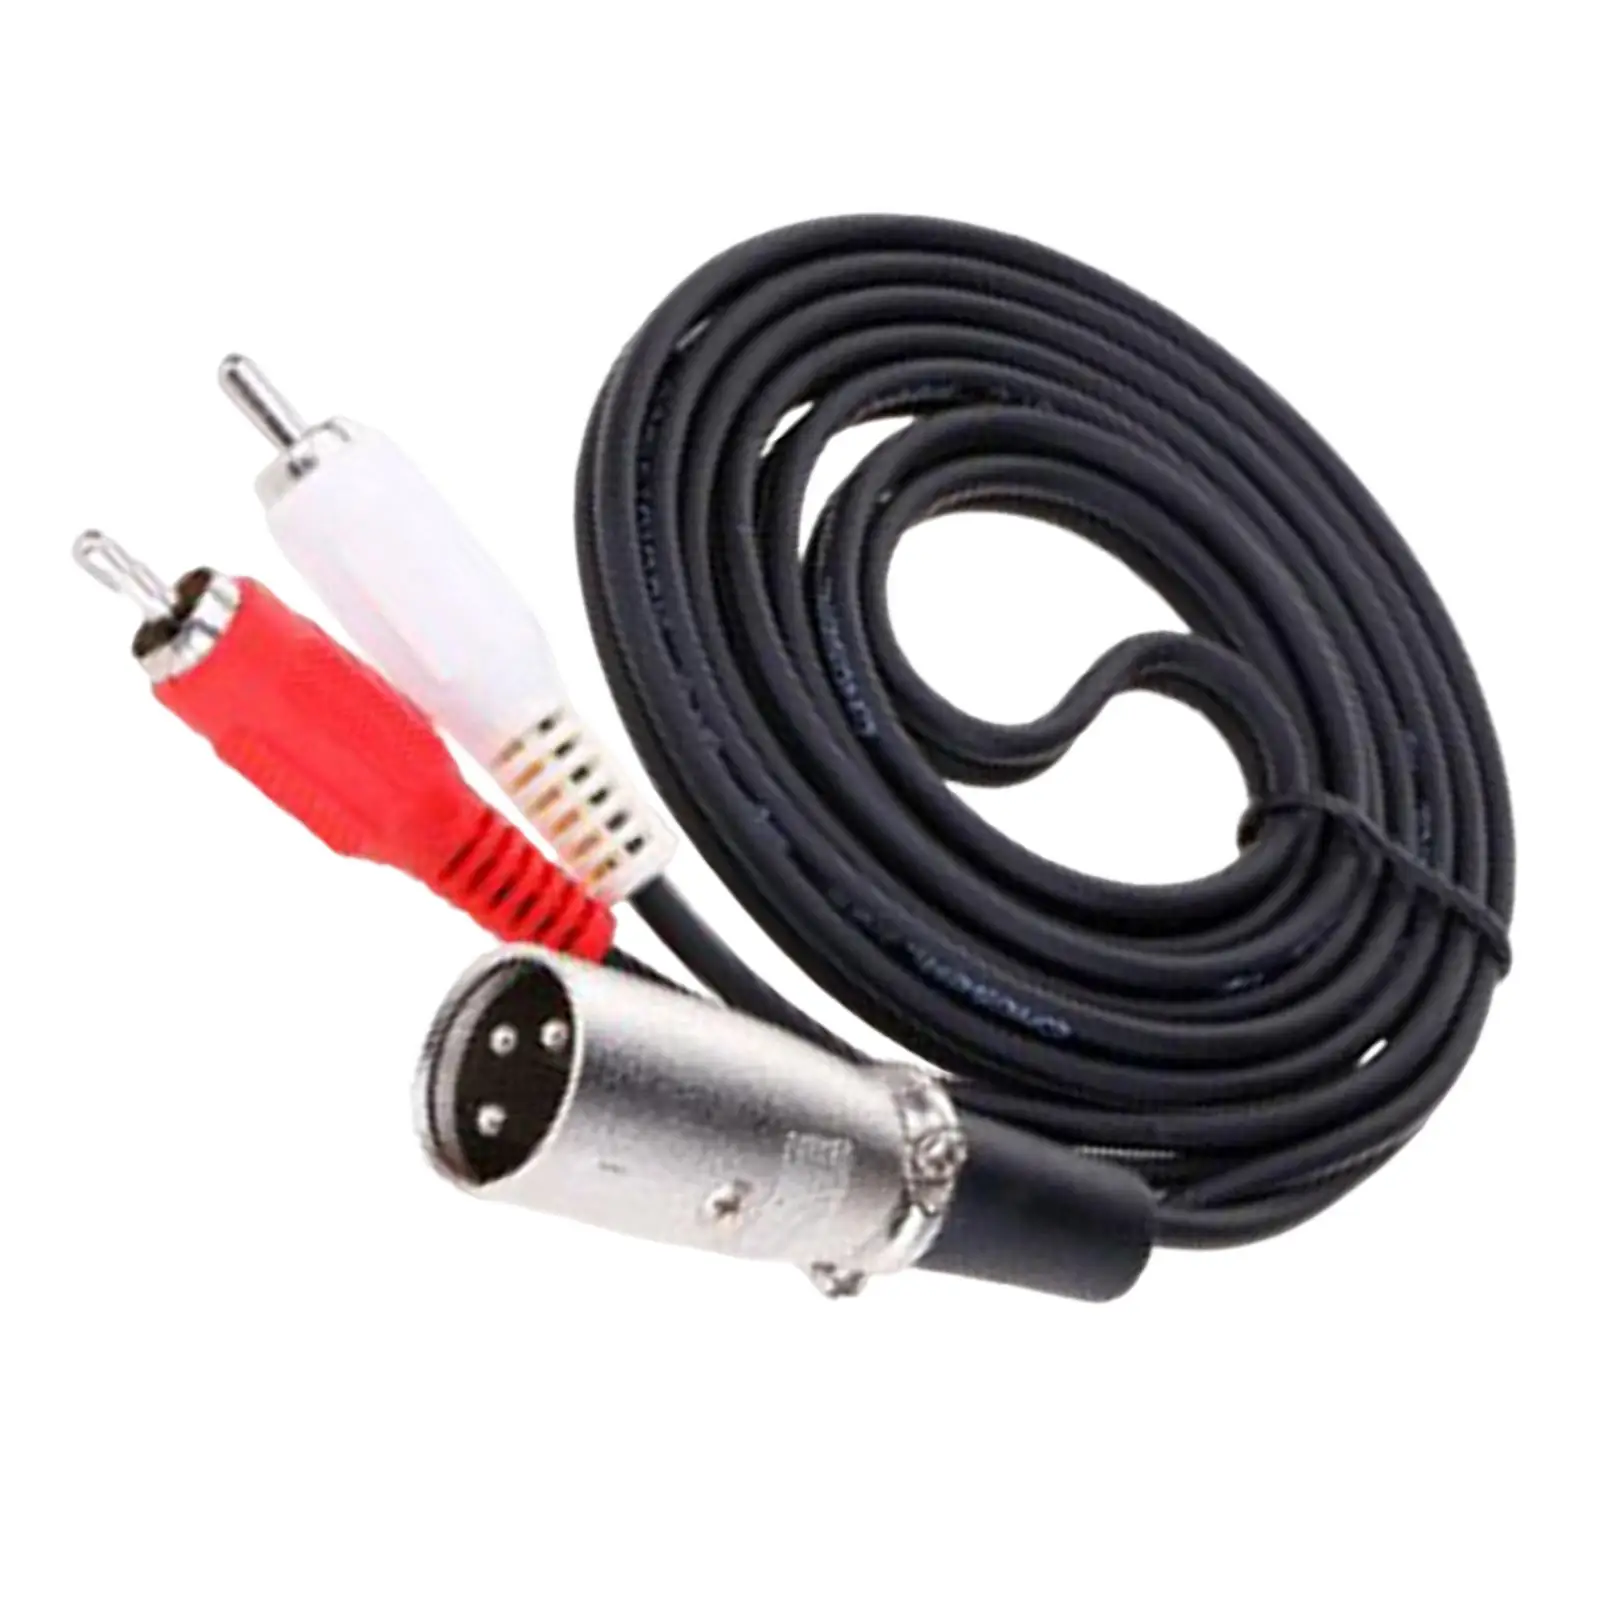 XLR 3 Pin Male to Dual RCA Male Plug Cable Adapter Mic Audio Speaker Y Splitter